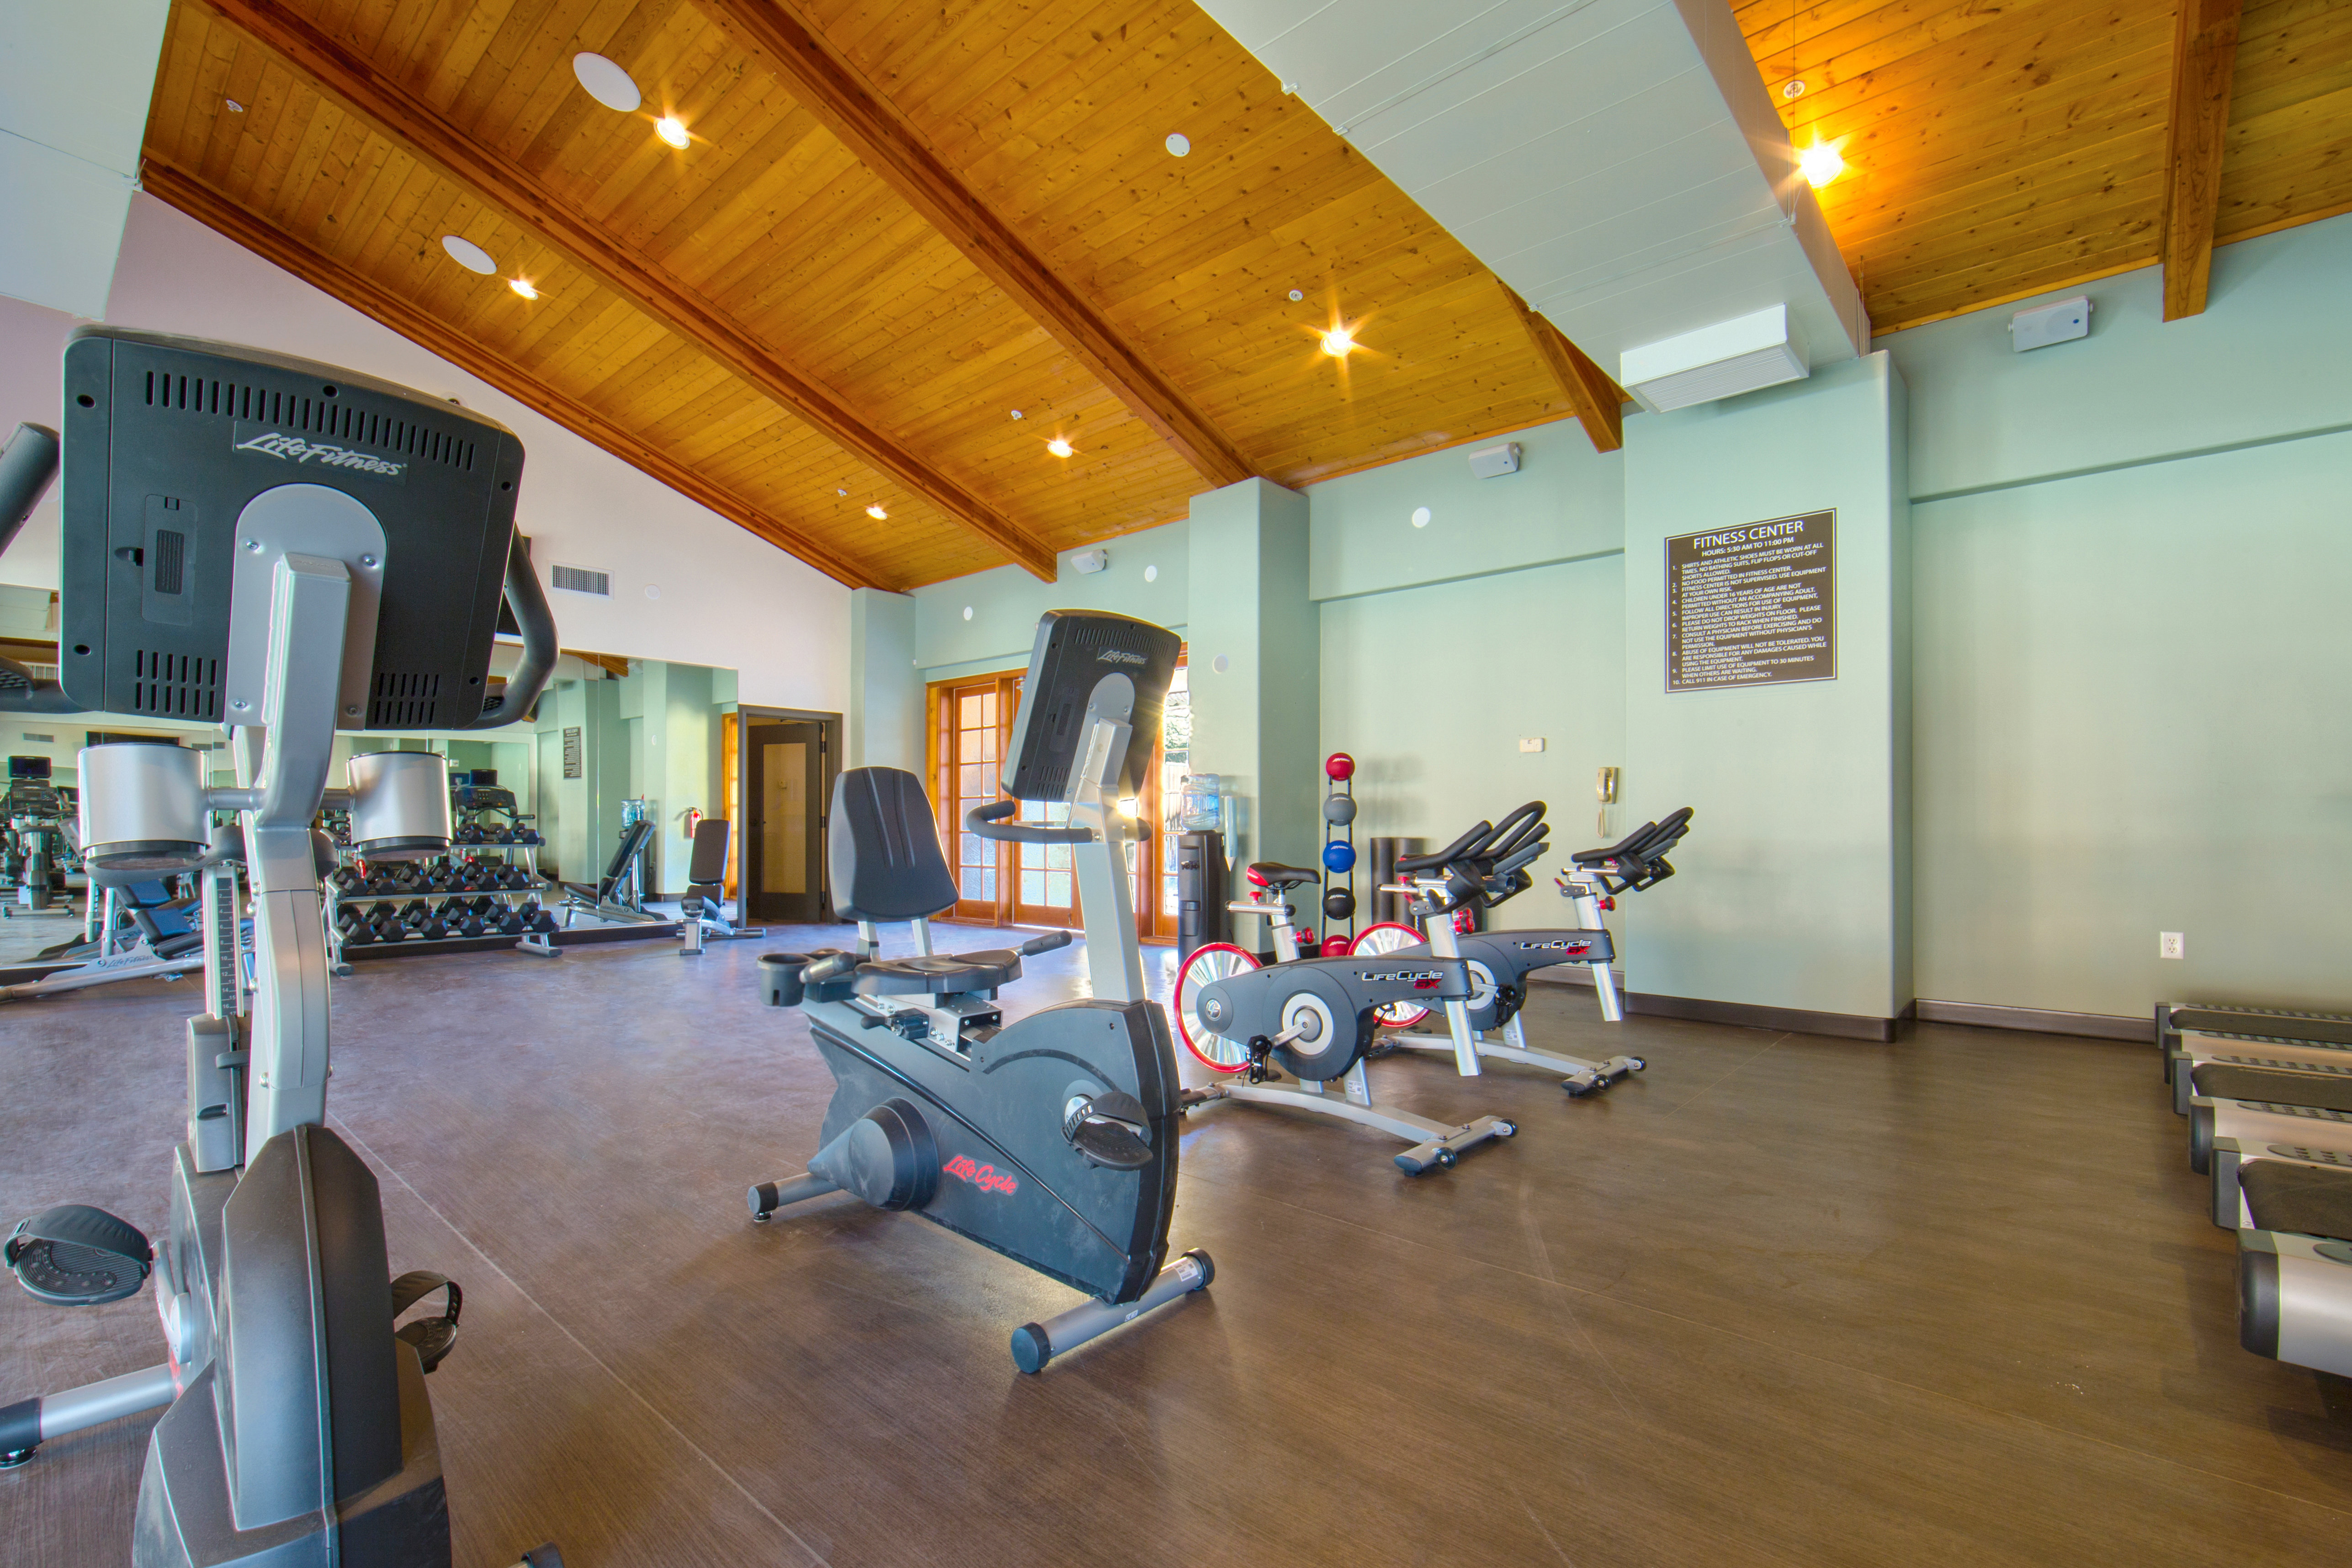 Enjoy the complimentary fitness center while staying at the resort